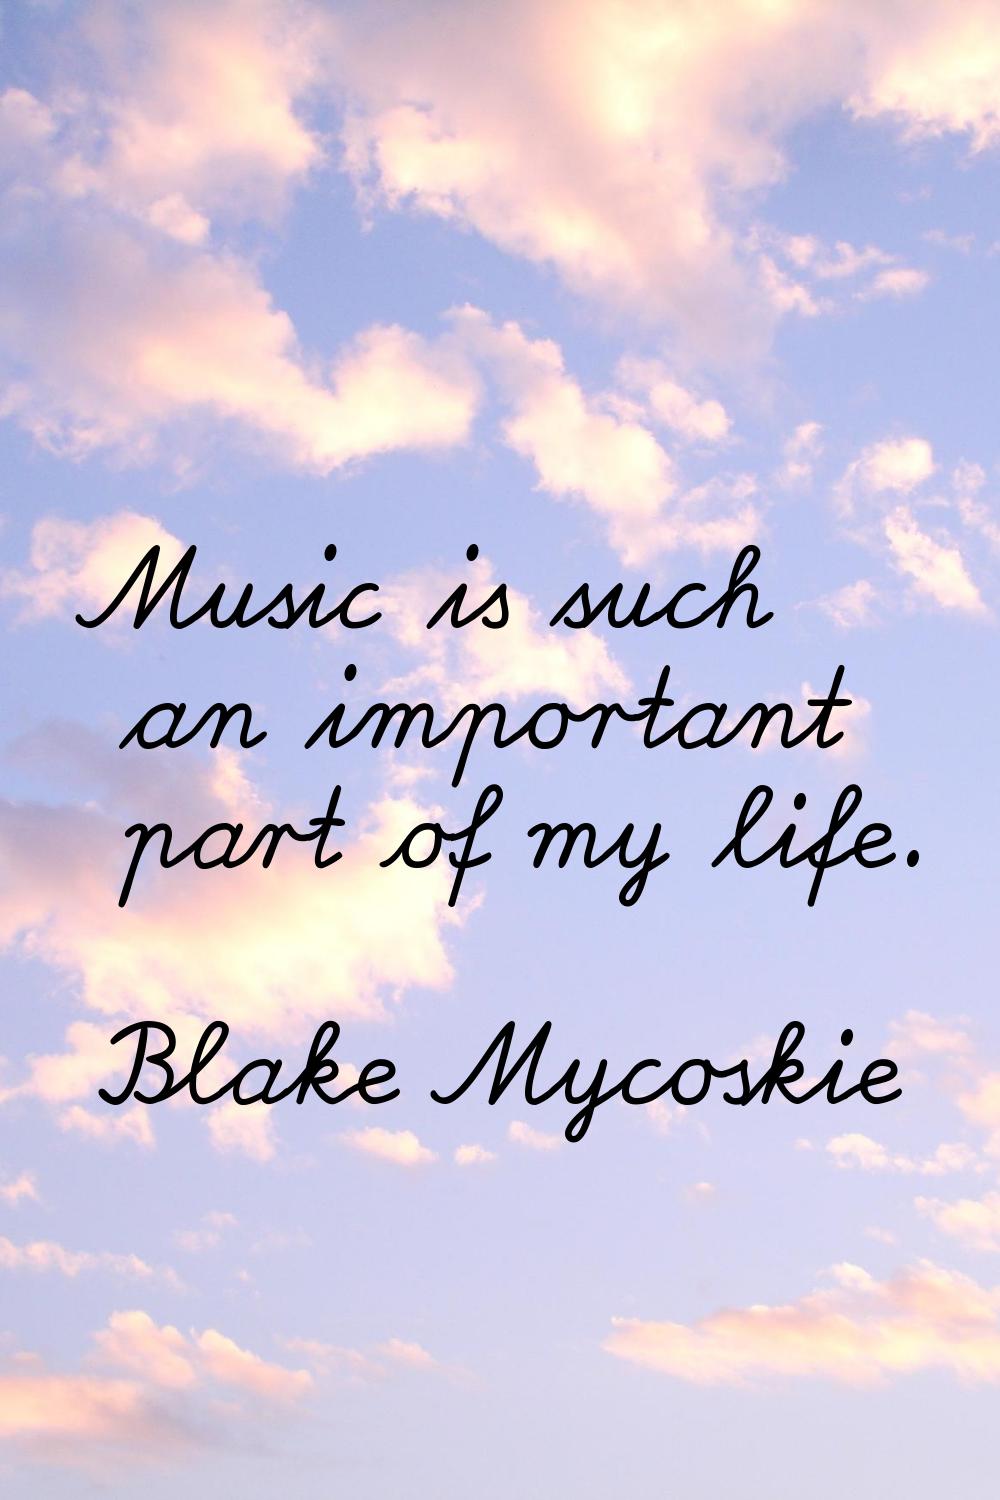 Music is such an important part of my life.